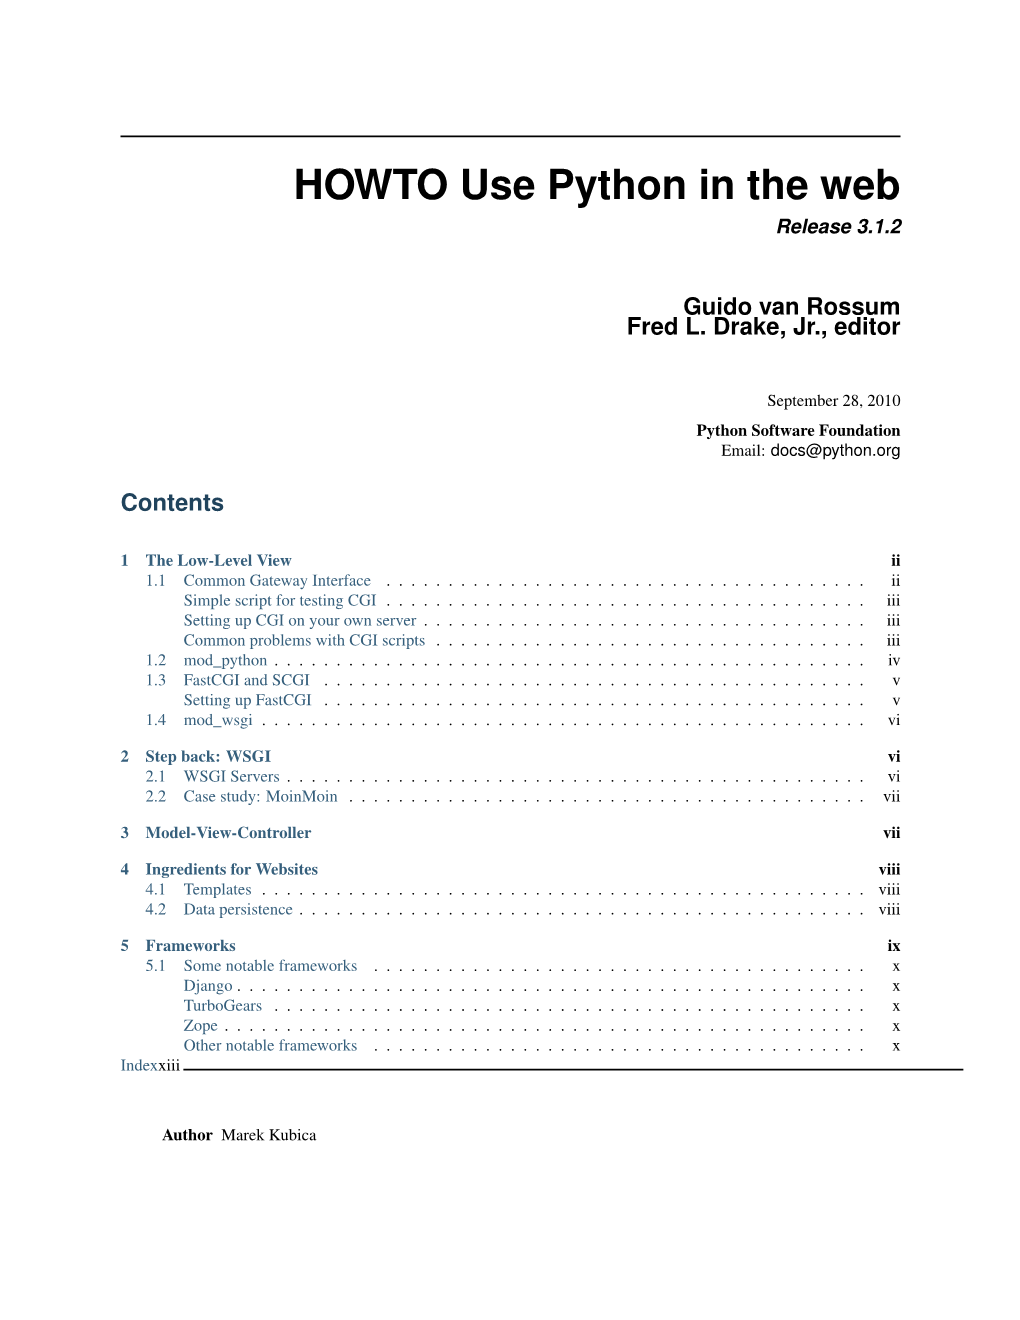 HOWTO Use Python in the Web Release 3.1.2